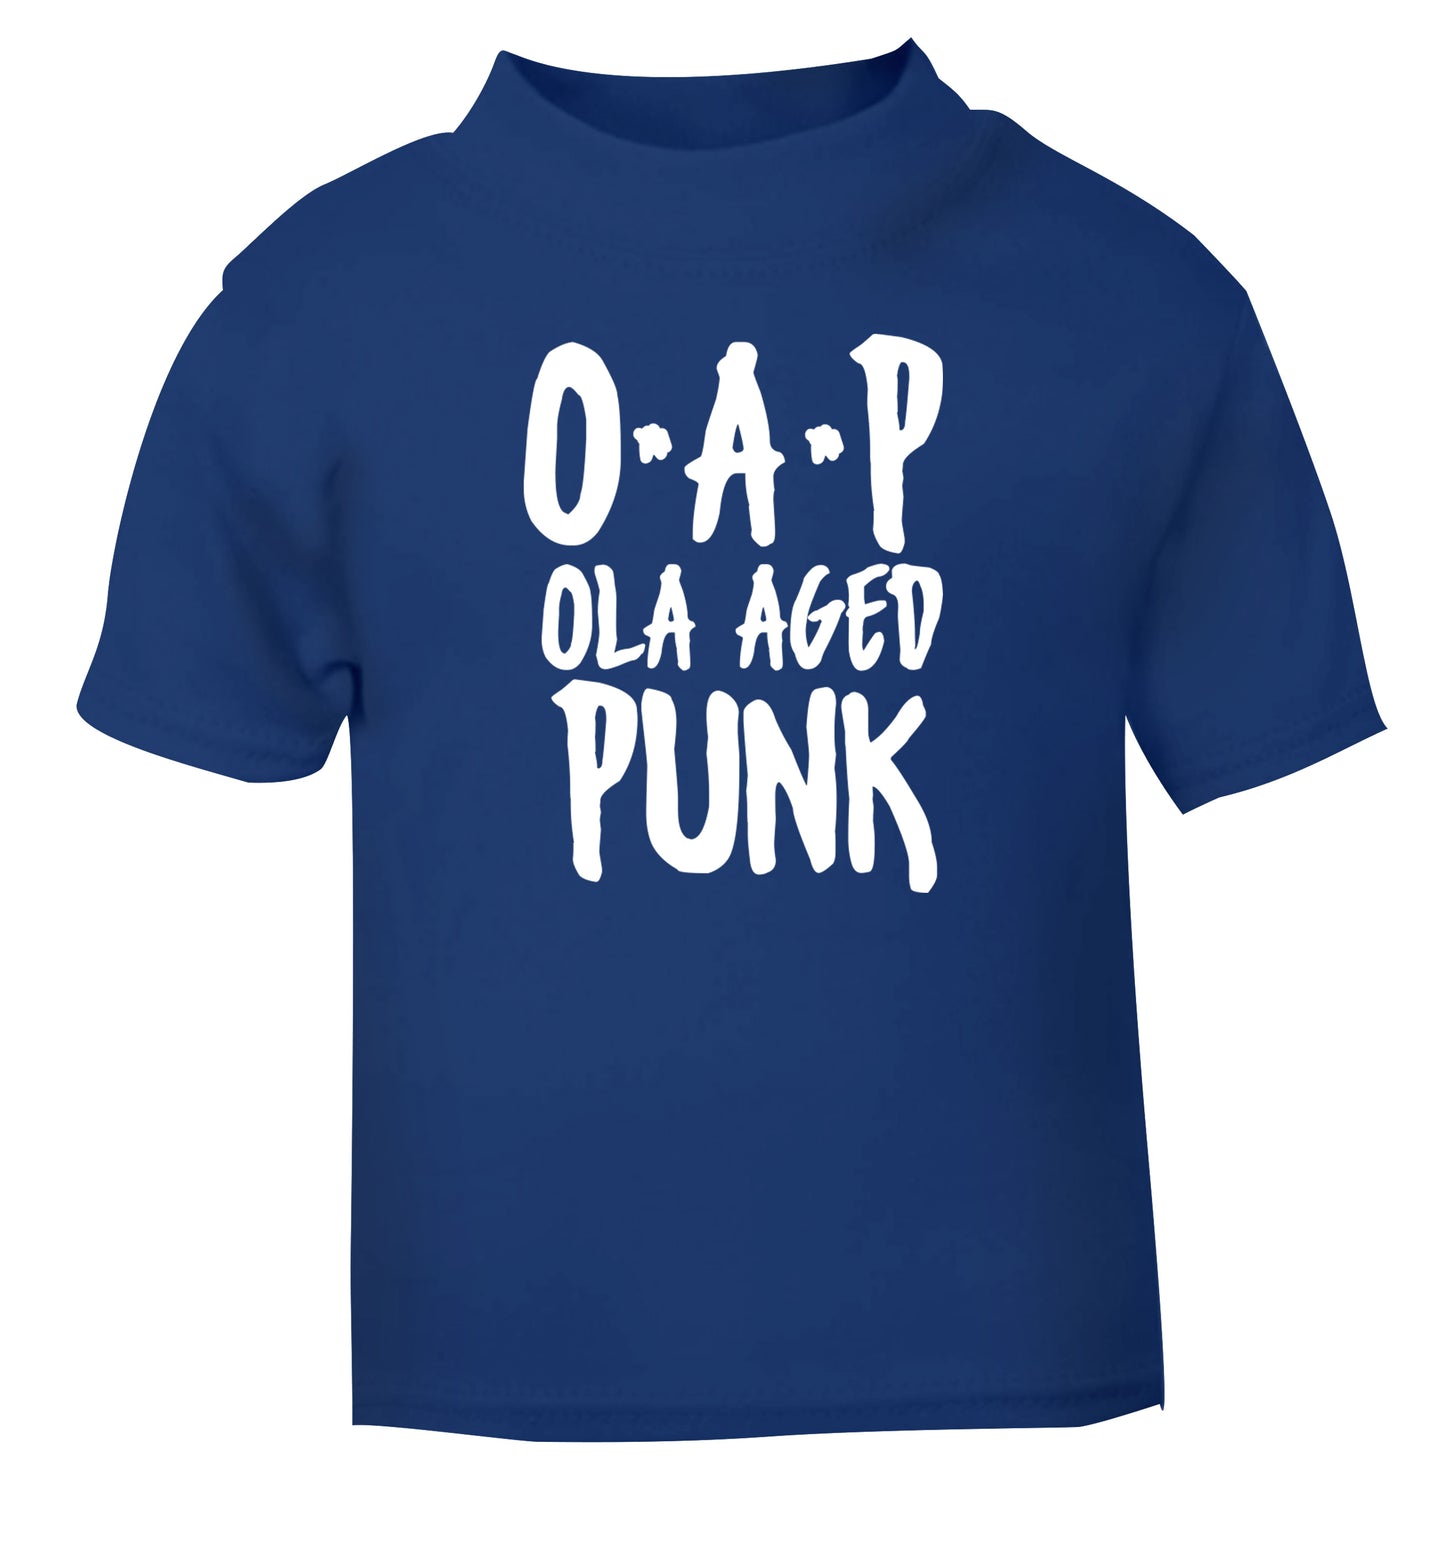 O.A.P Old Aged Punk blue Baby Toddler Tshirt 2 Years